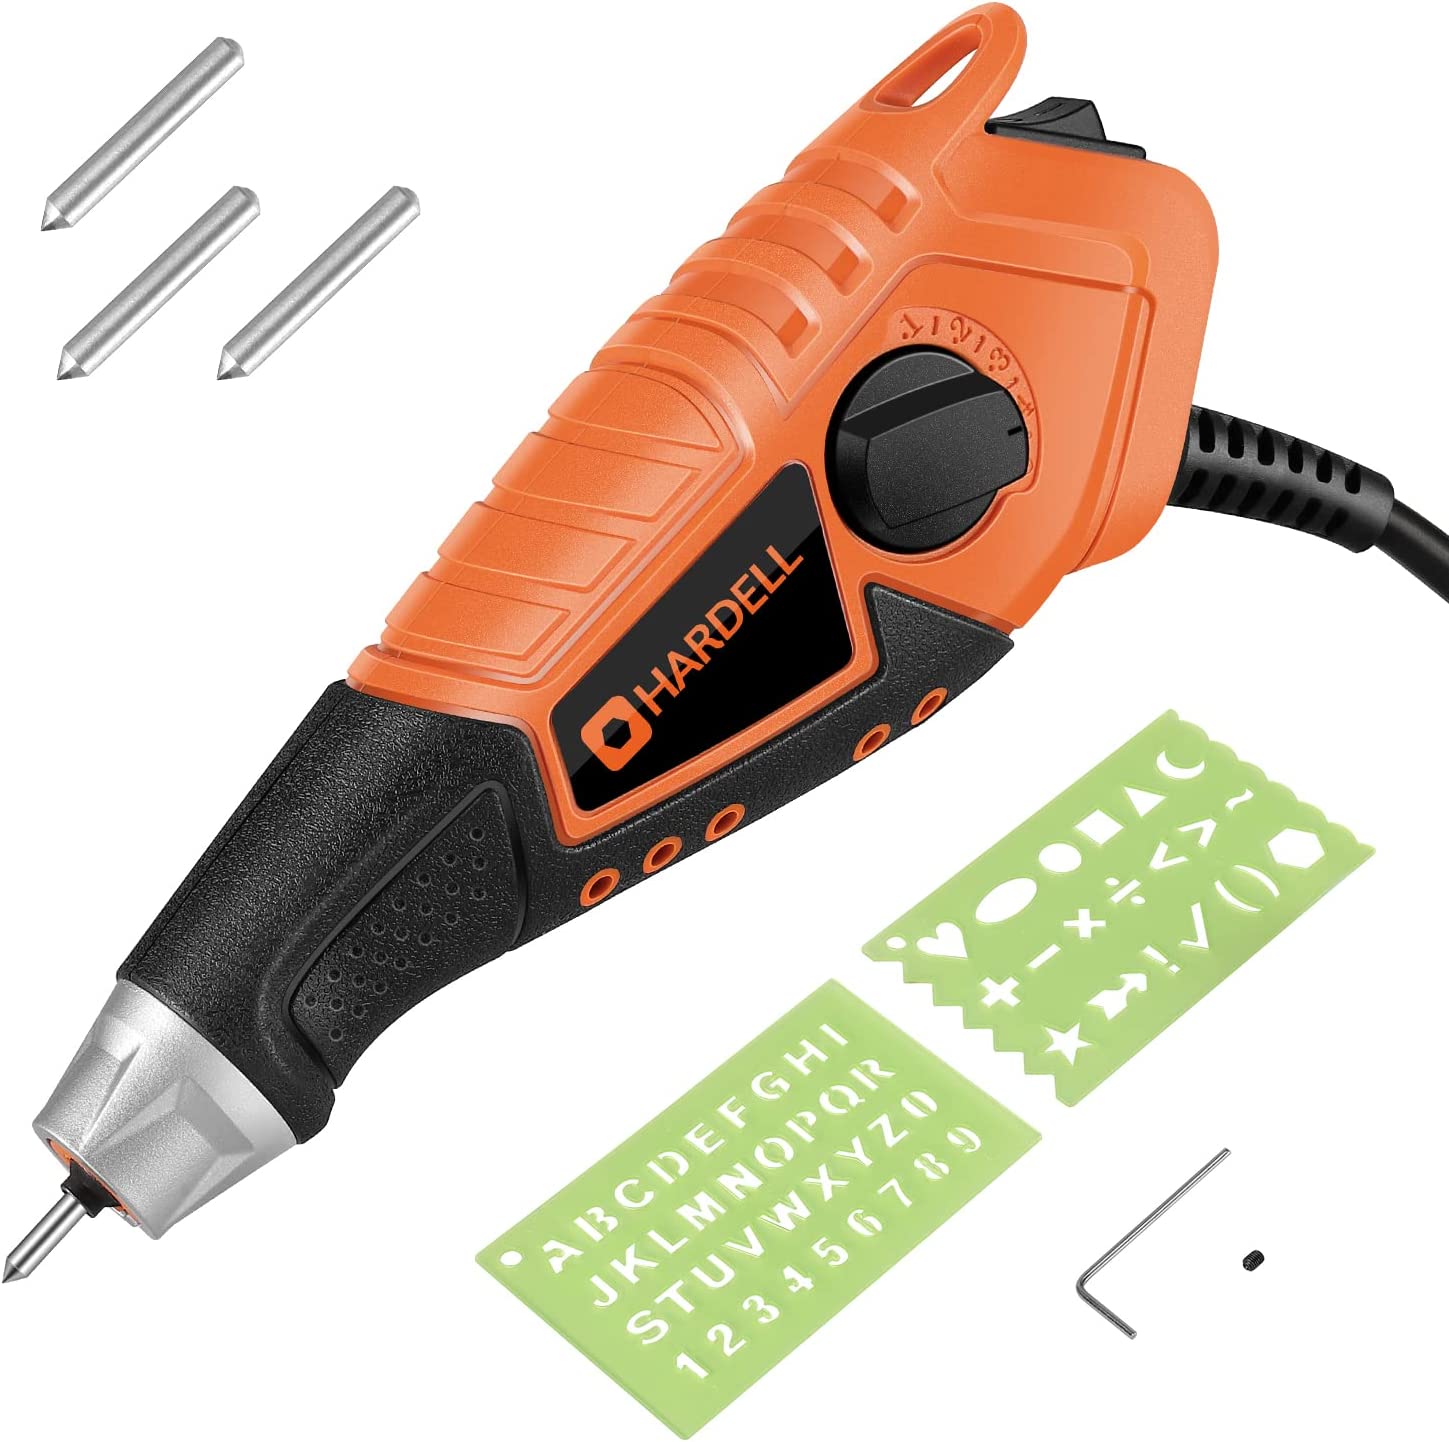 HARDELL 15W Engraver,5 Speed Etching Power Tool [...]